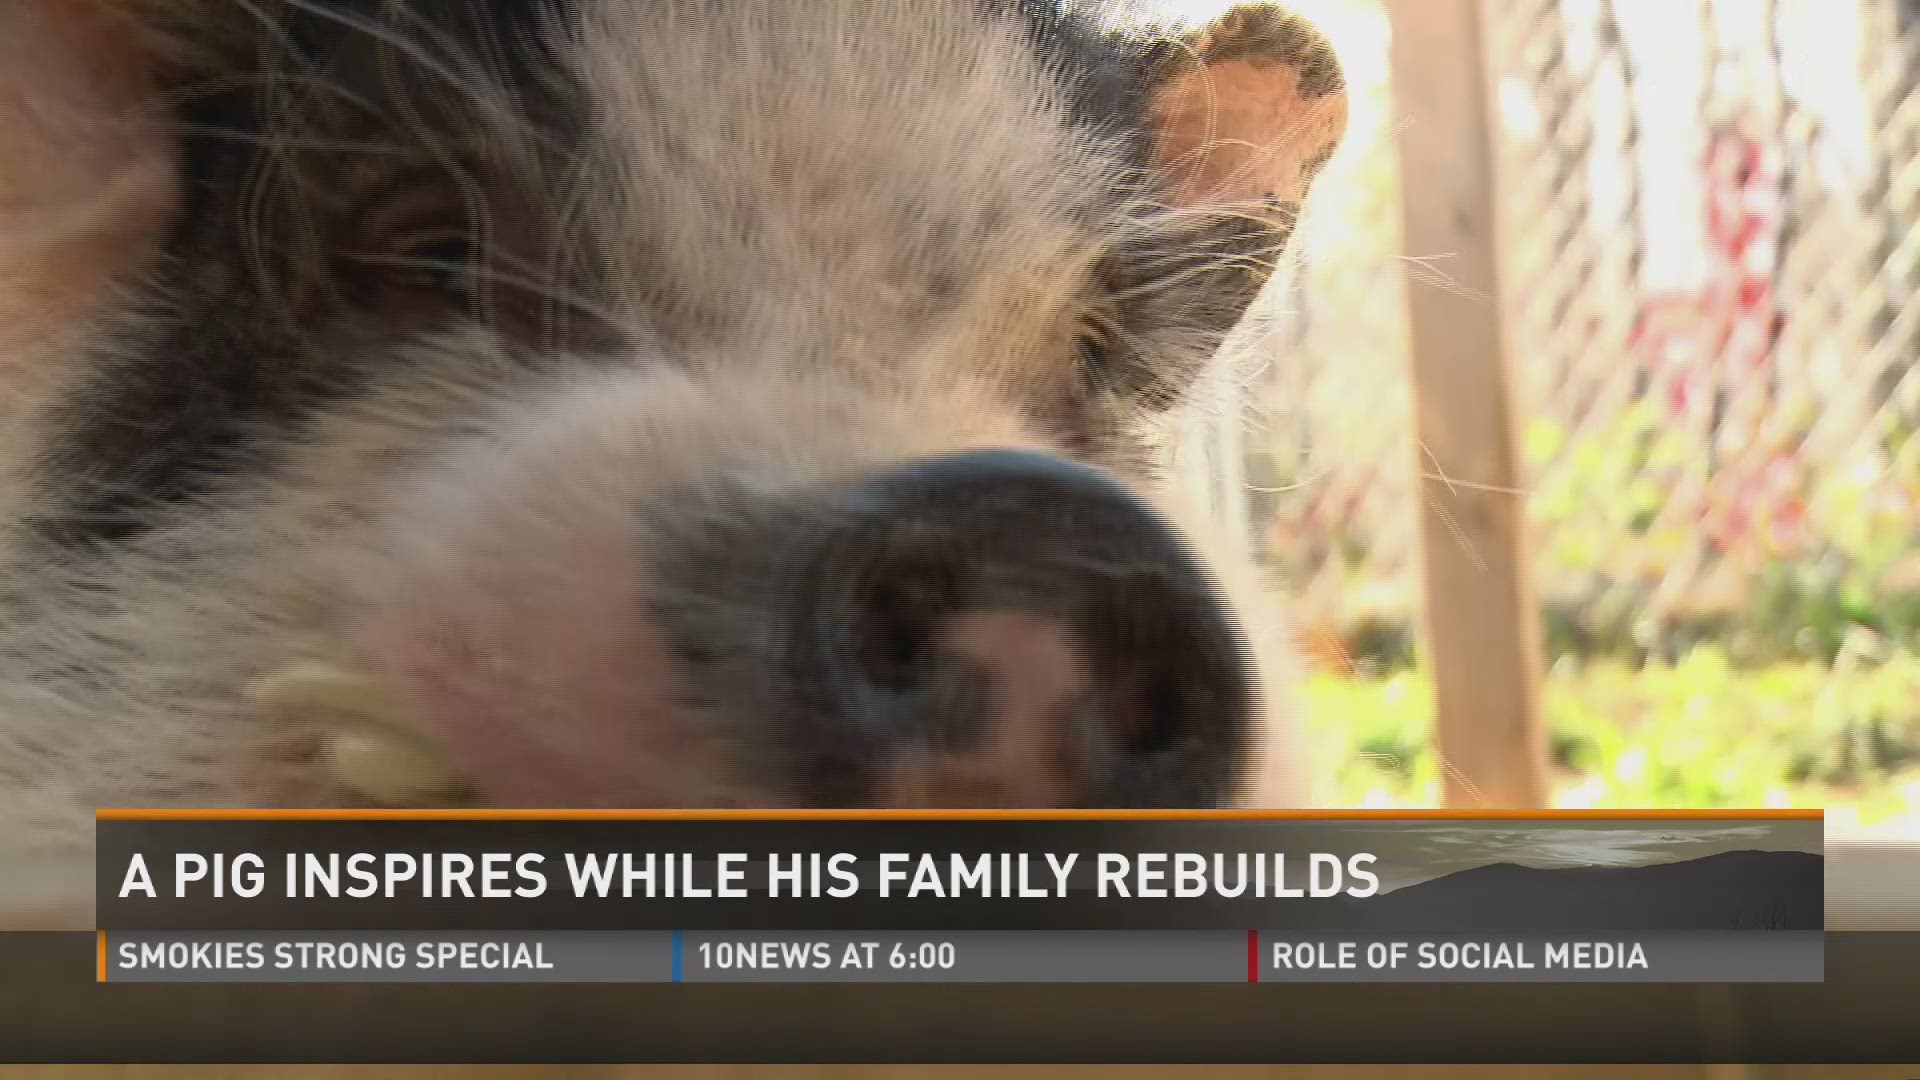 Nov. 27, 2017: Charles the pig survived a wildfire disaster, and has served as a beacon of hope for East Tennessee.